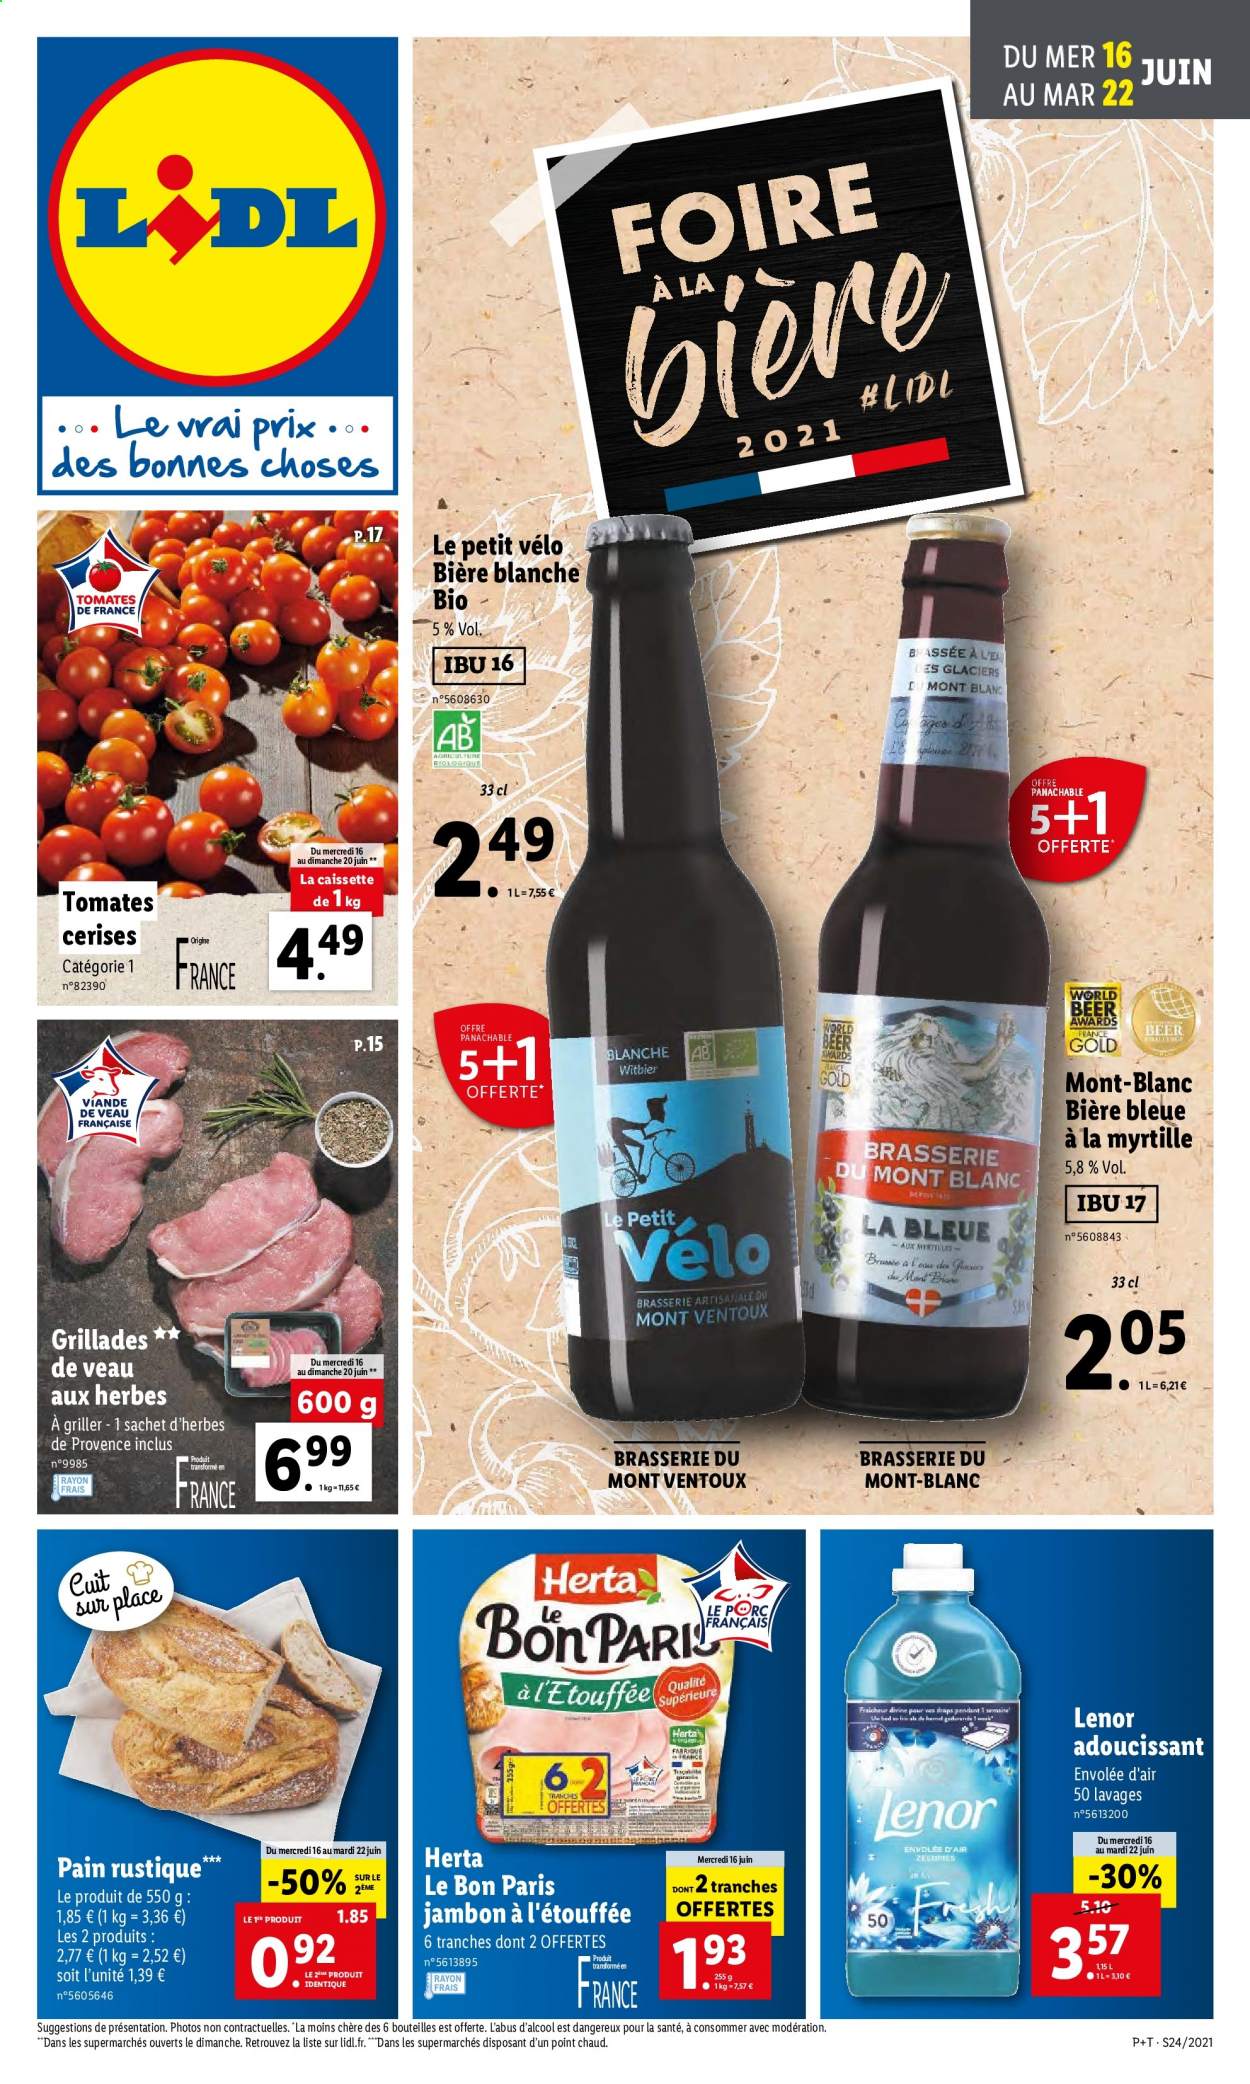 Catalogue Lidl - 16.06.2021 - 22.06.2021. Page 1.